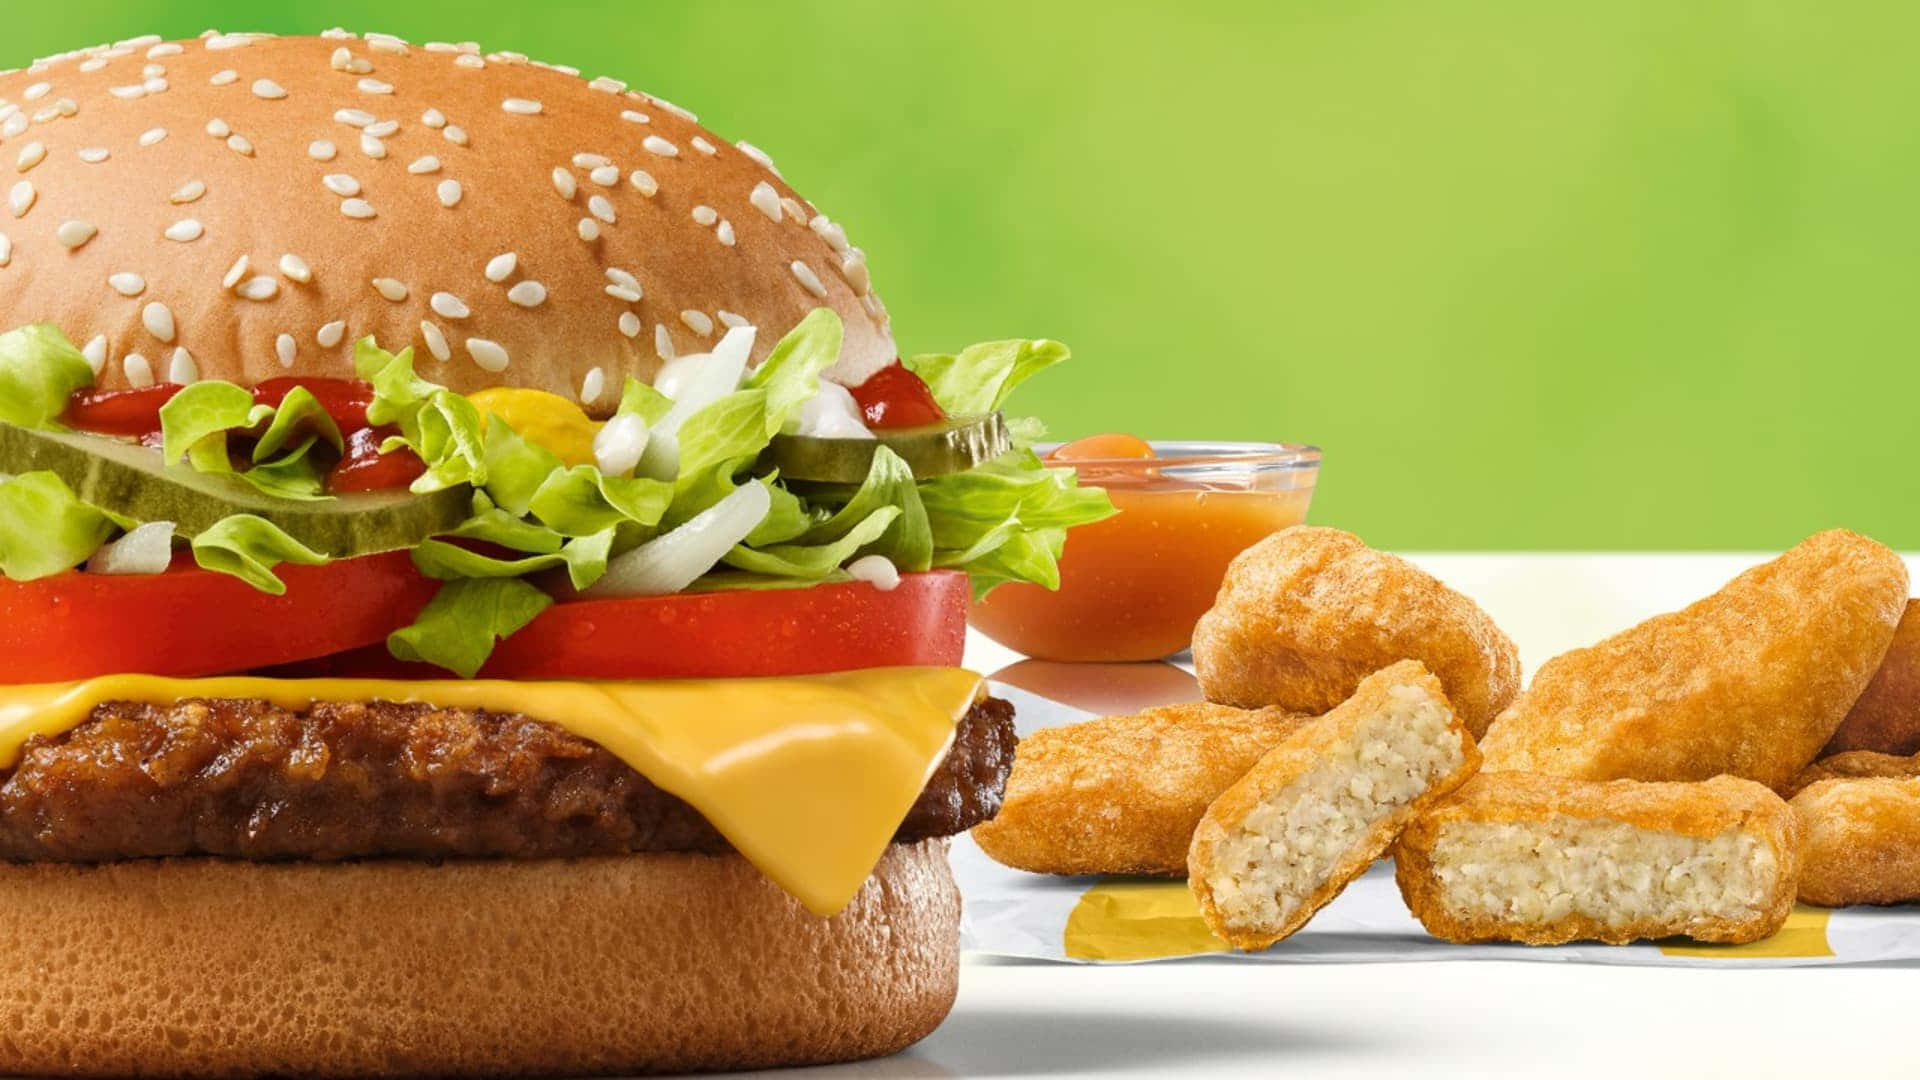 Freshly made burgers, fries and soft drinks available at McDonalds!